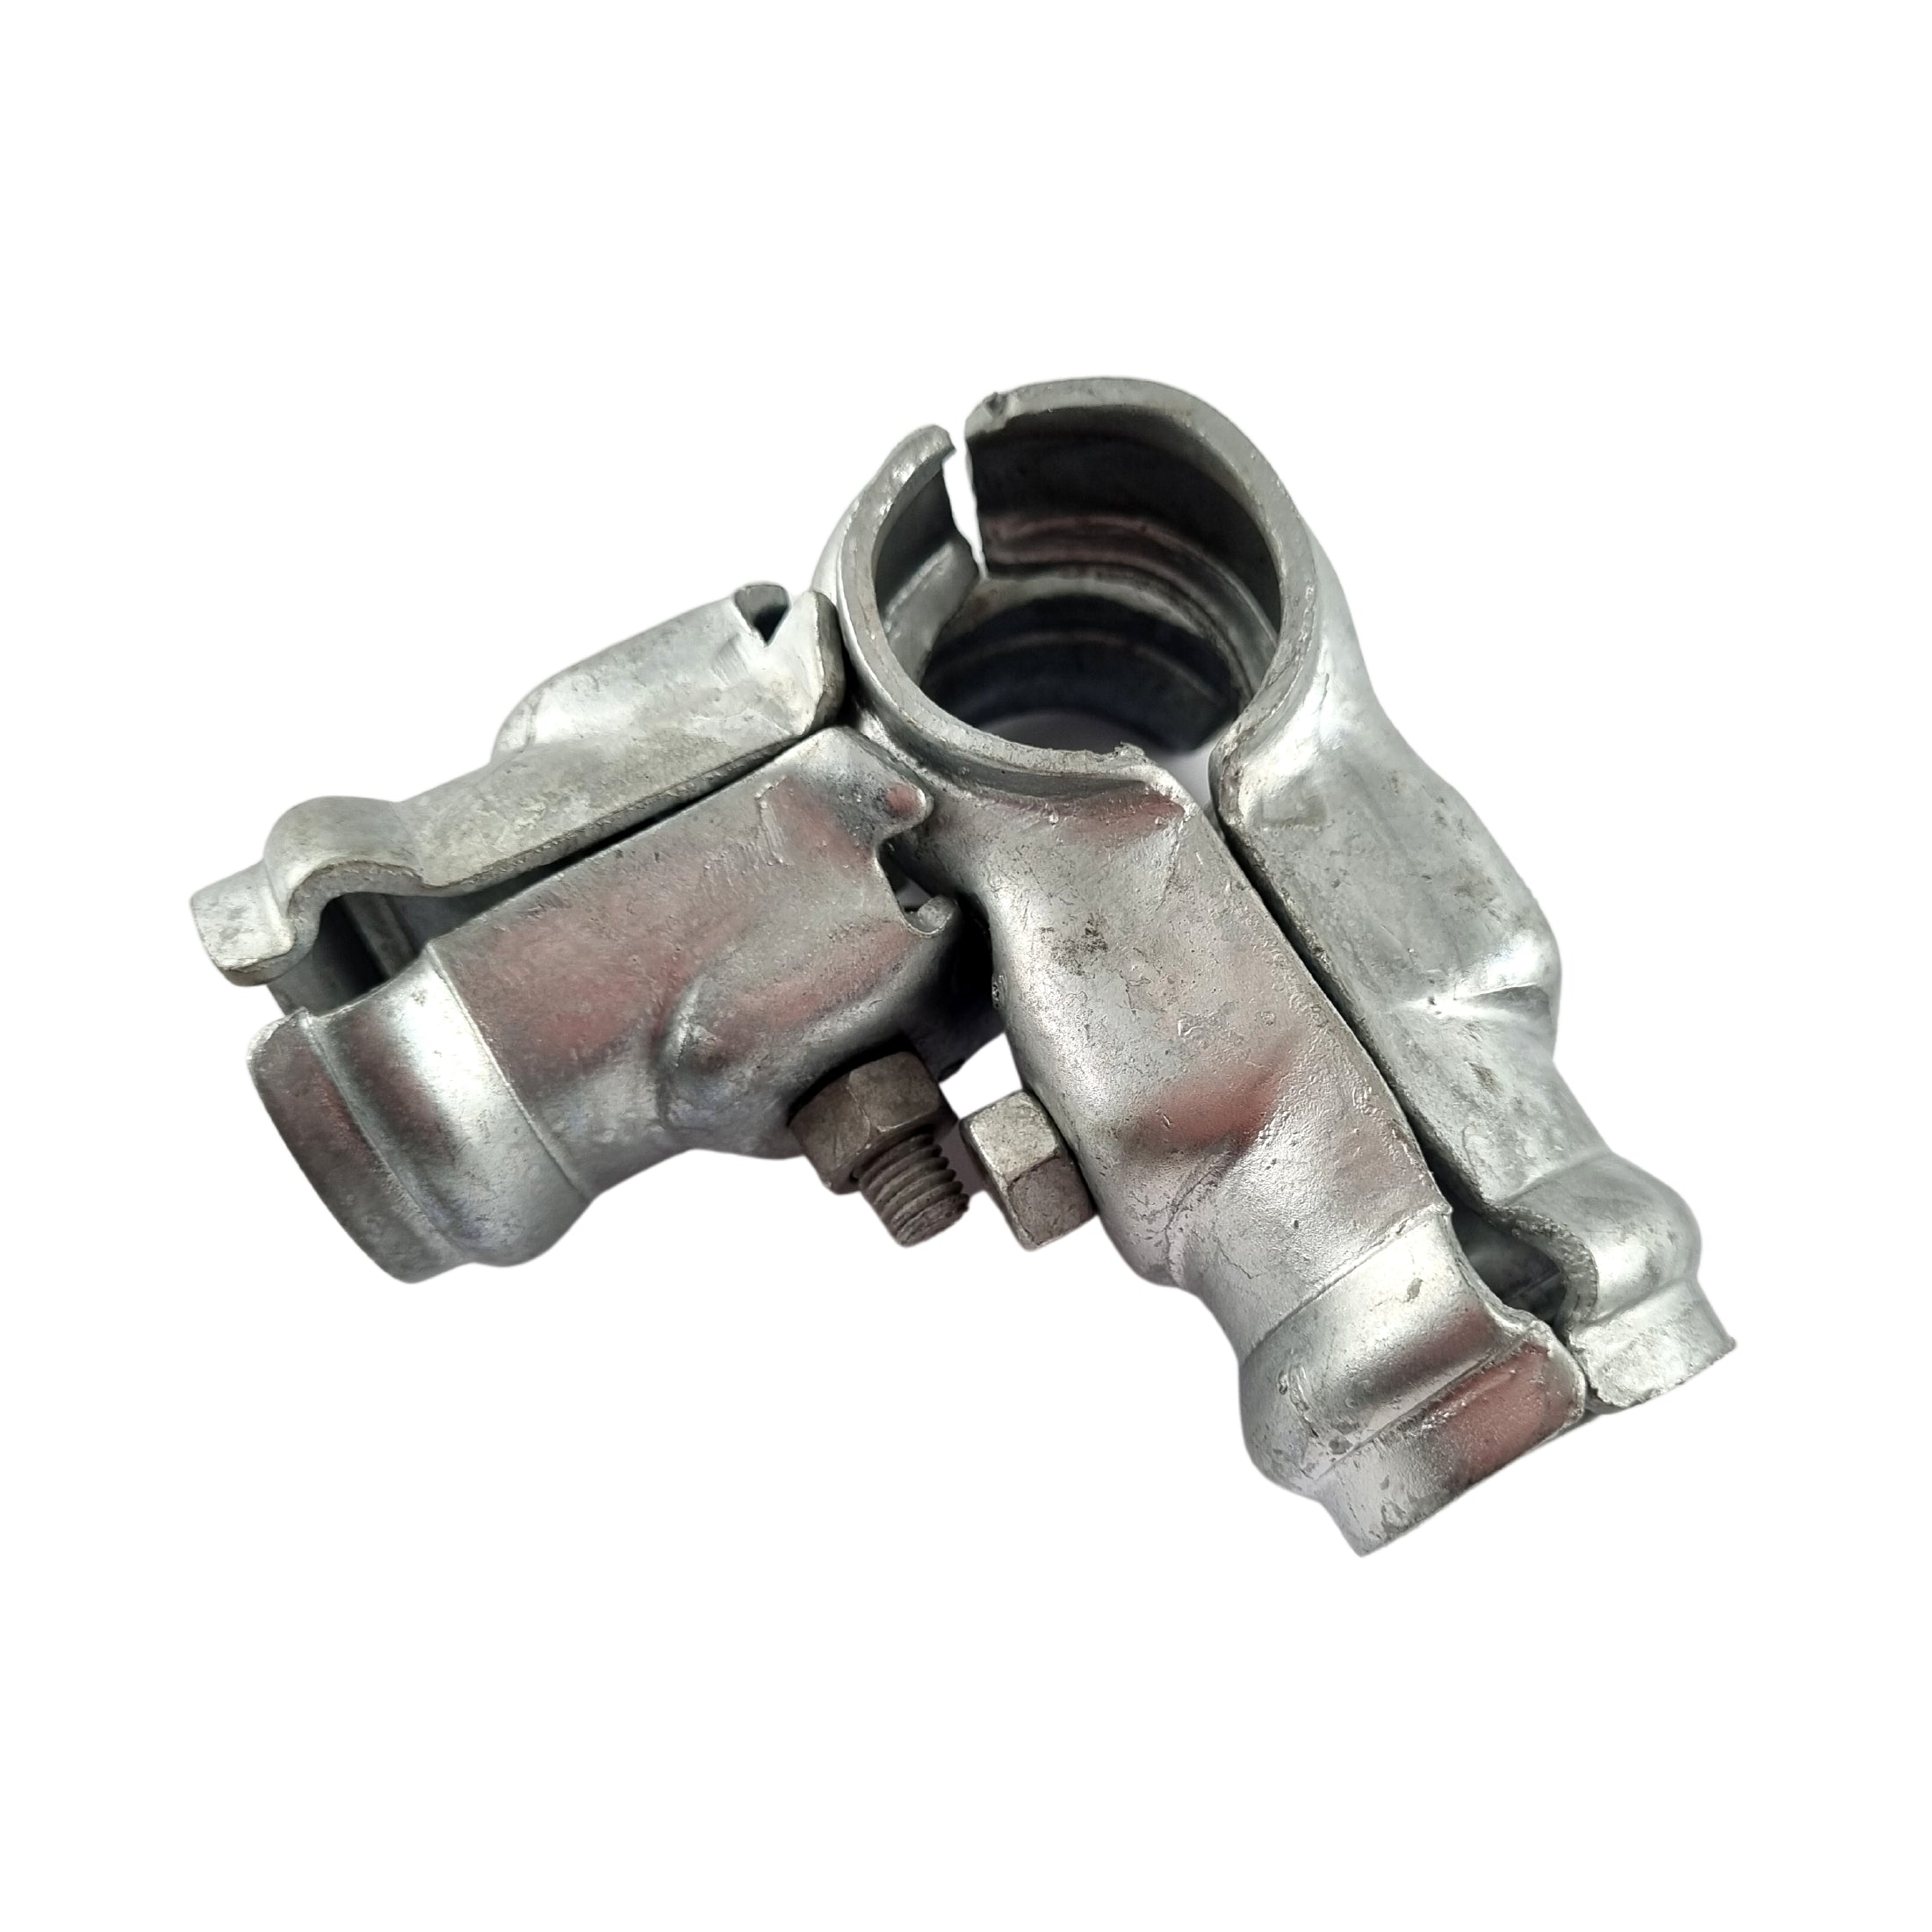 Shop corner fittings in the fence and gate fittings range online now. Australia wide.